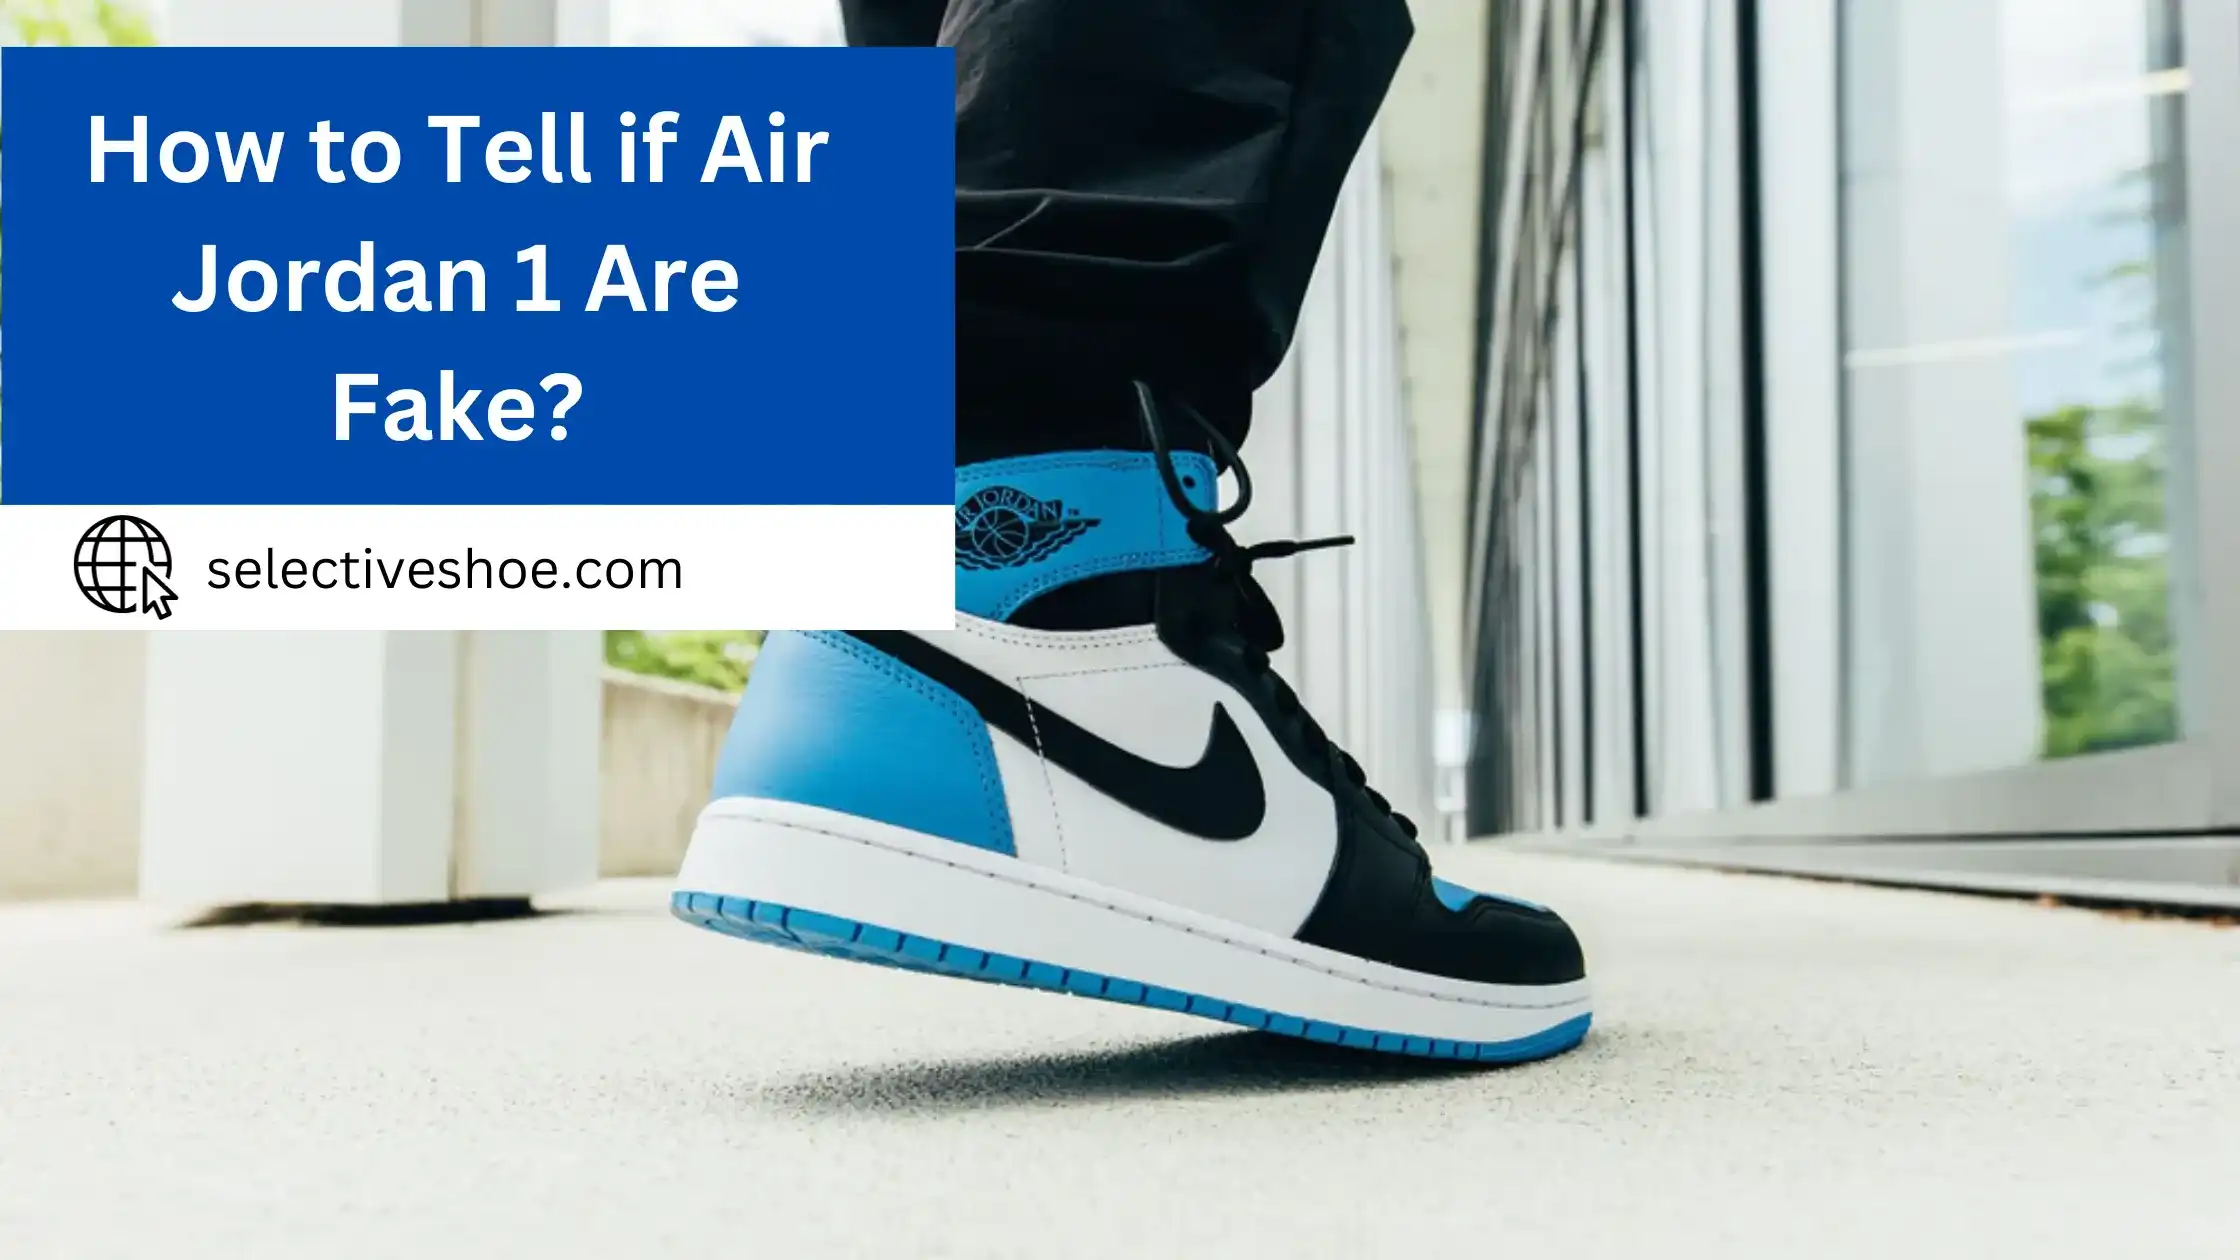 How to Tell if Air Jordan 1 Are Fake? Detailed Information